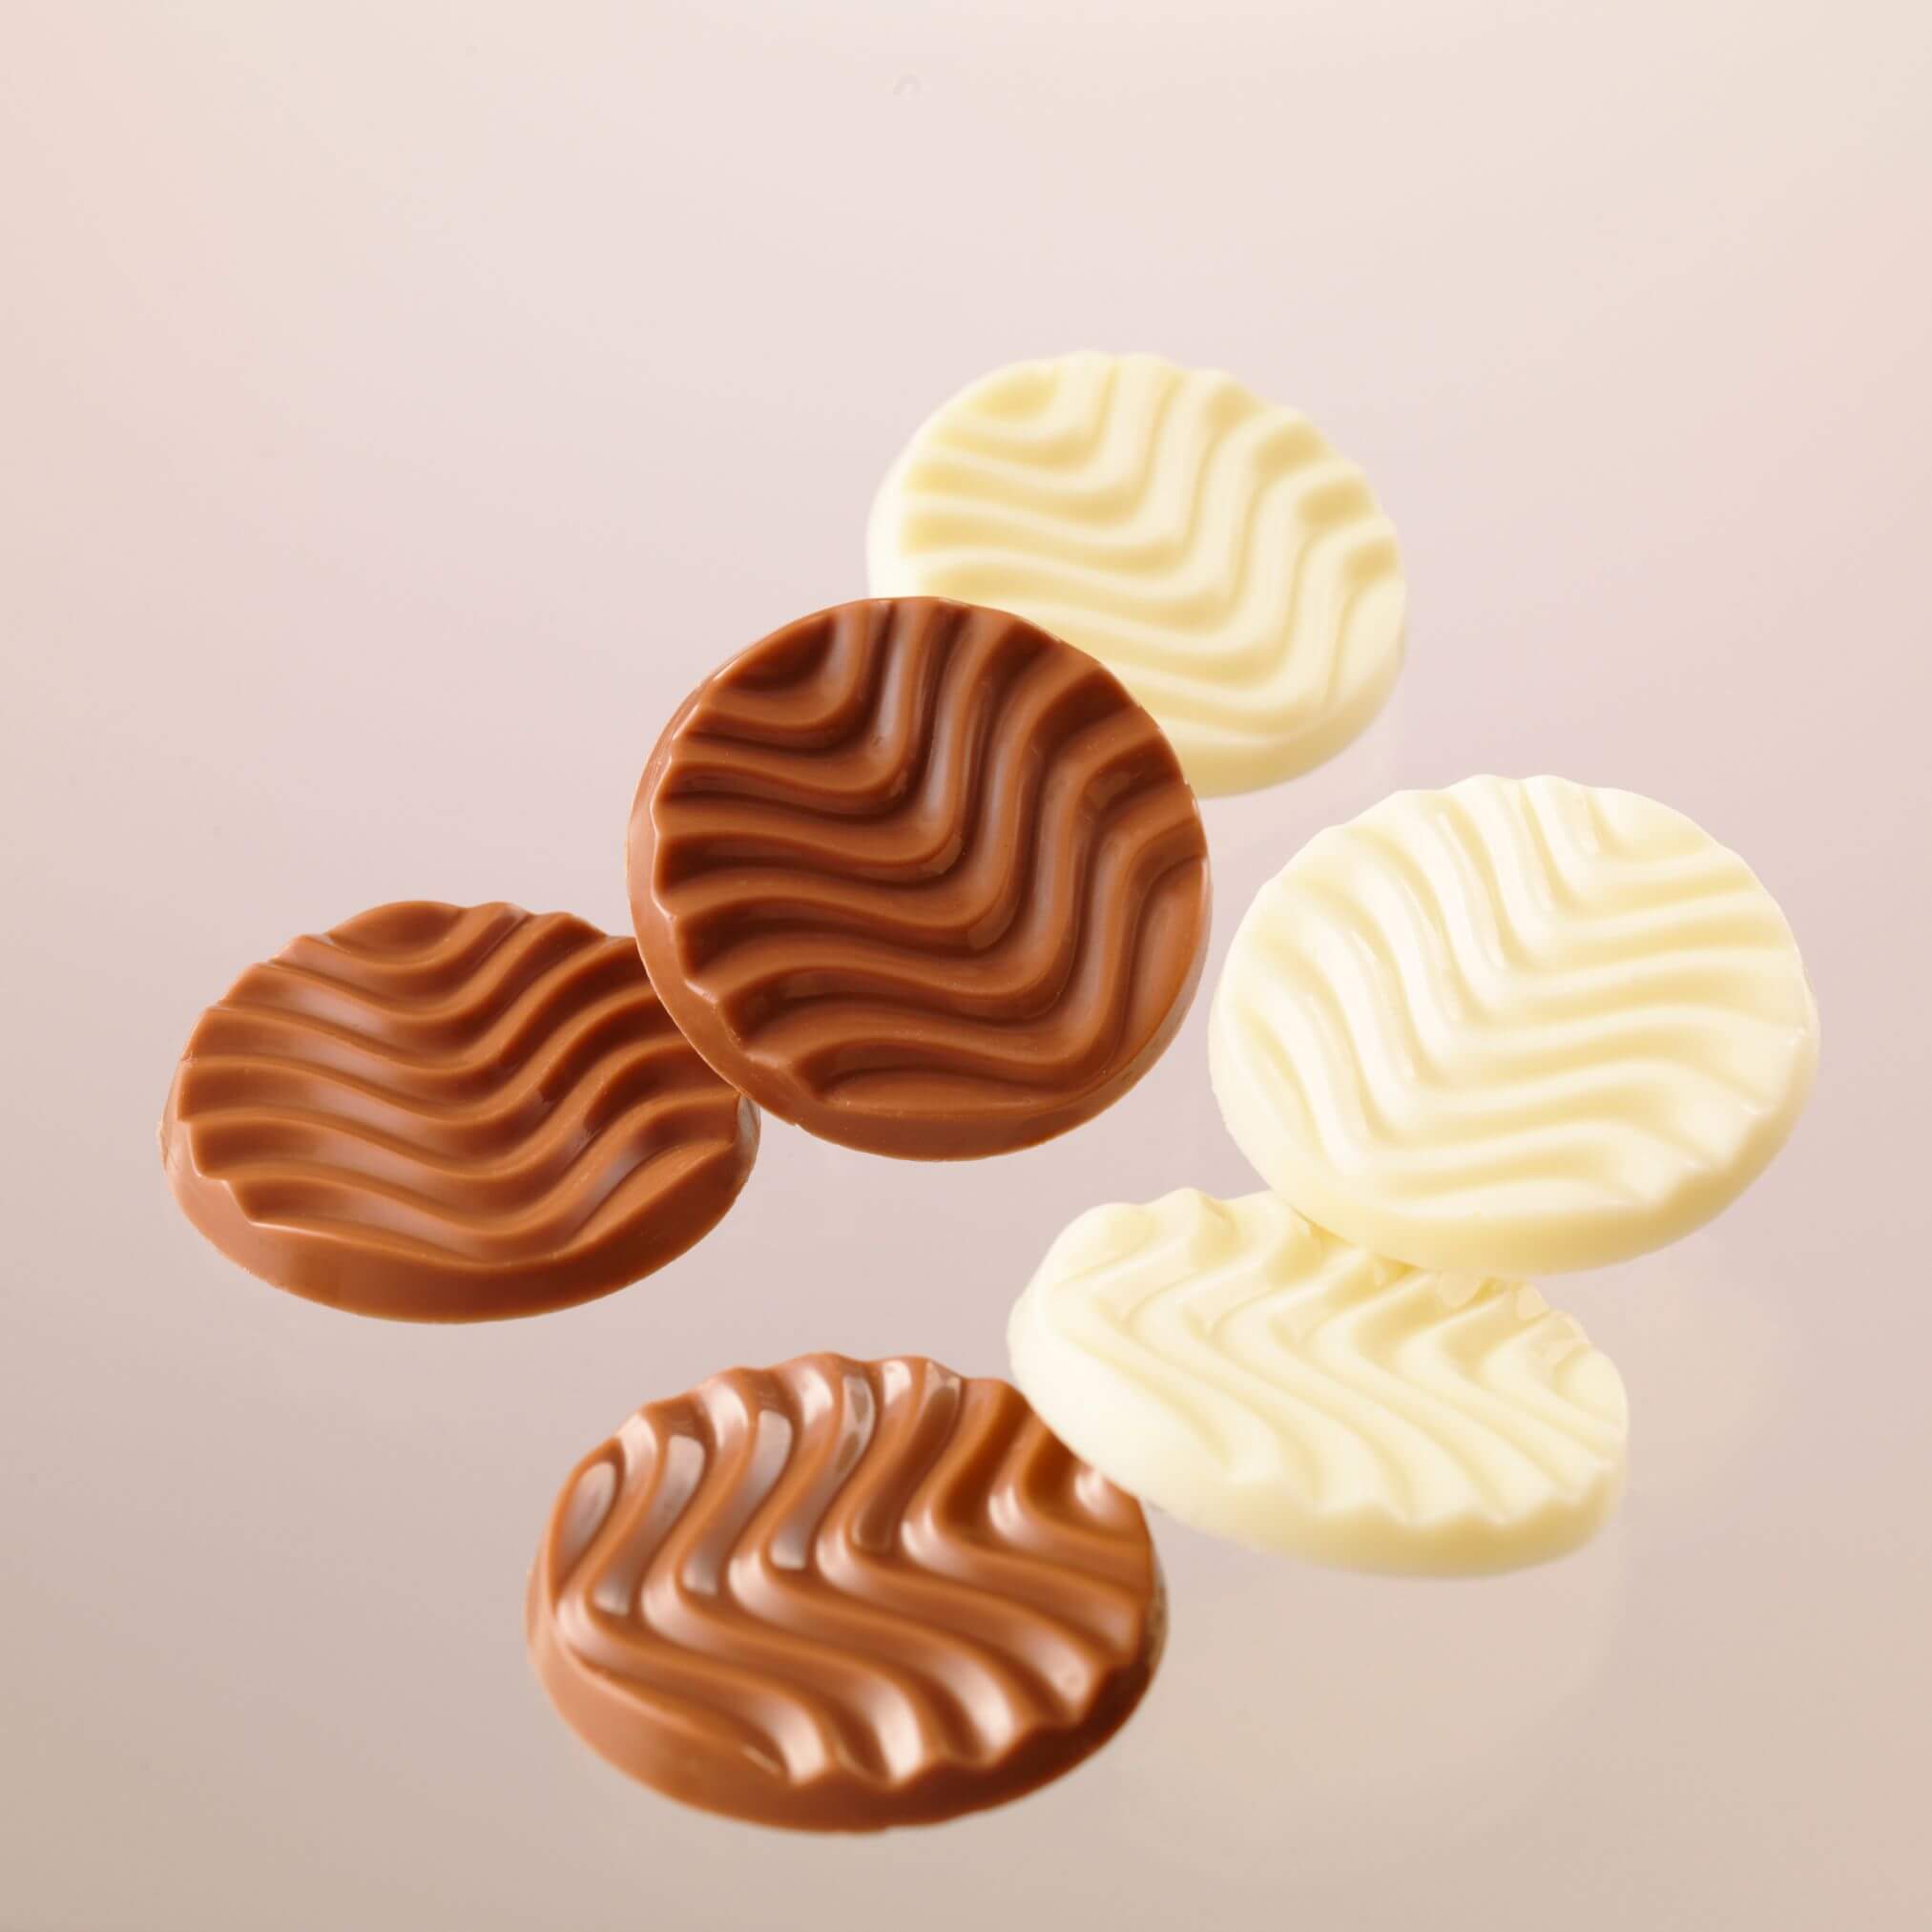 ROYCE' Chocolate - Pure Chocolate "Creamy Milk & White" - Image shows brown and white chocolate discs with a waved texture. Background is light brown in color.